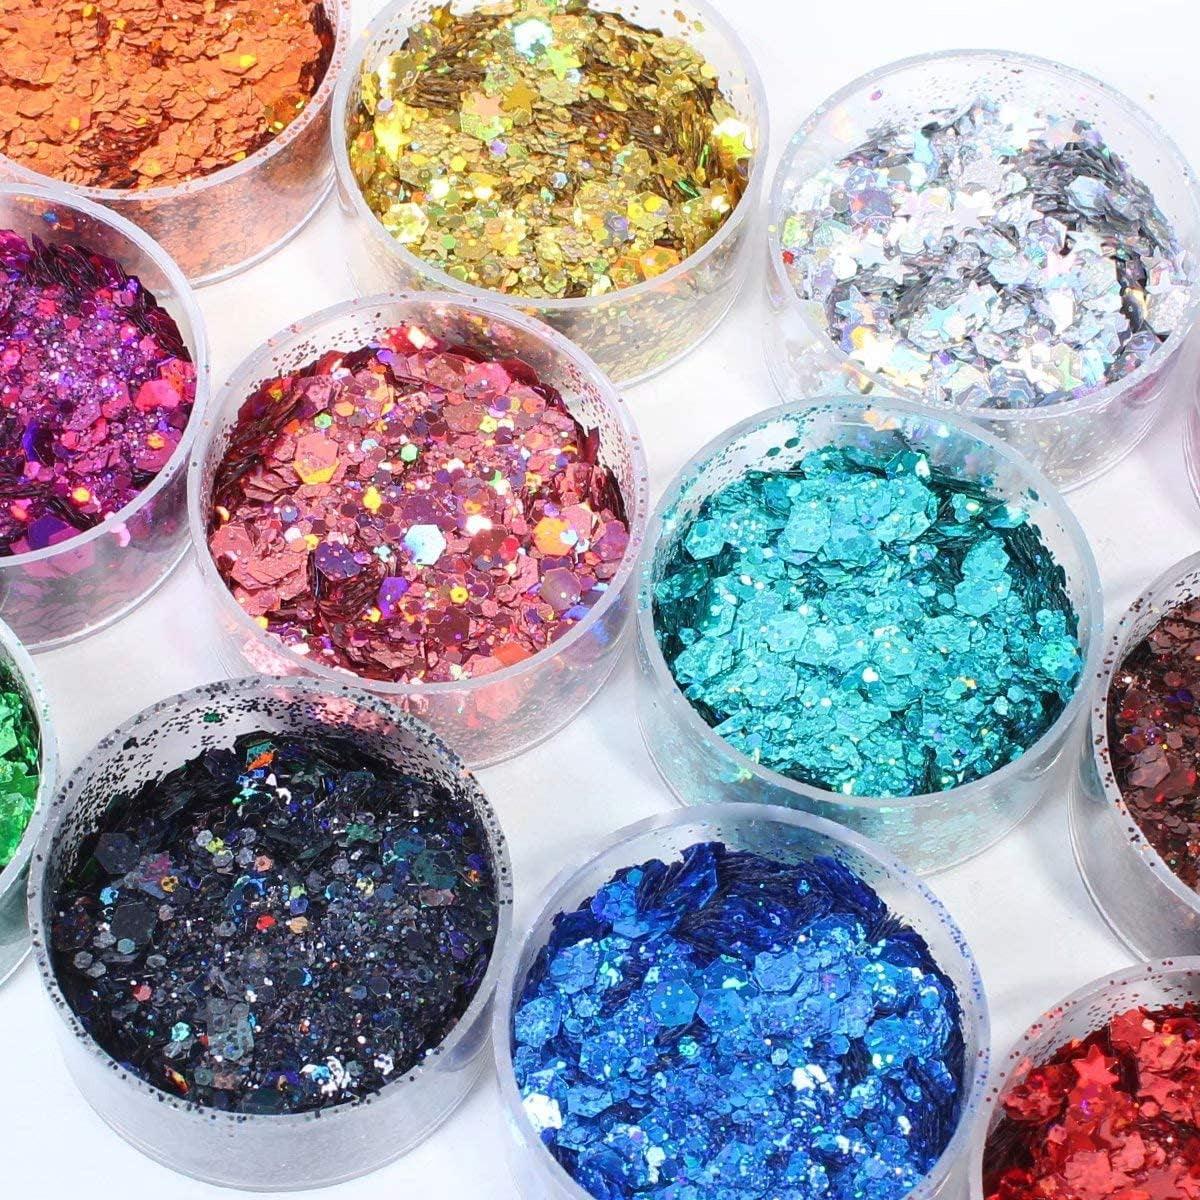 Teenitor Holographic Ultra Fine Glitter and Chunky Glitter,Craft Glitters  with 110g Resin Glitter Powder Sequins and 100g Metallic Iridescent Chunky